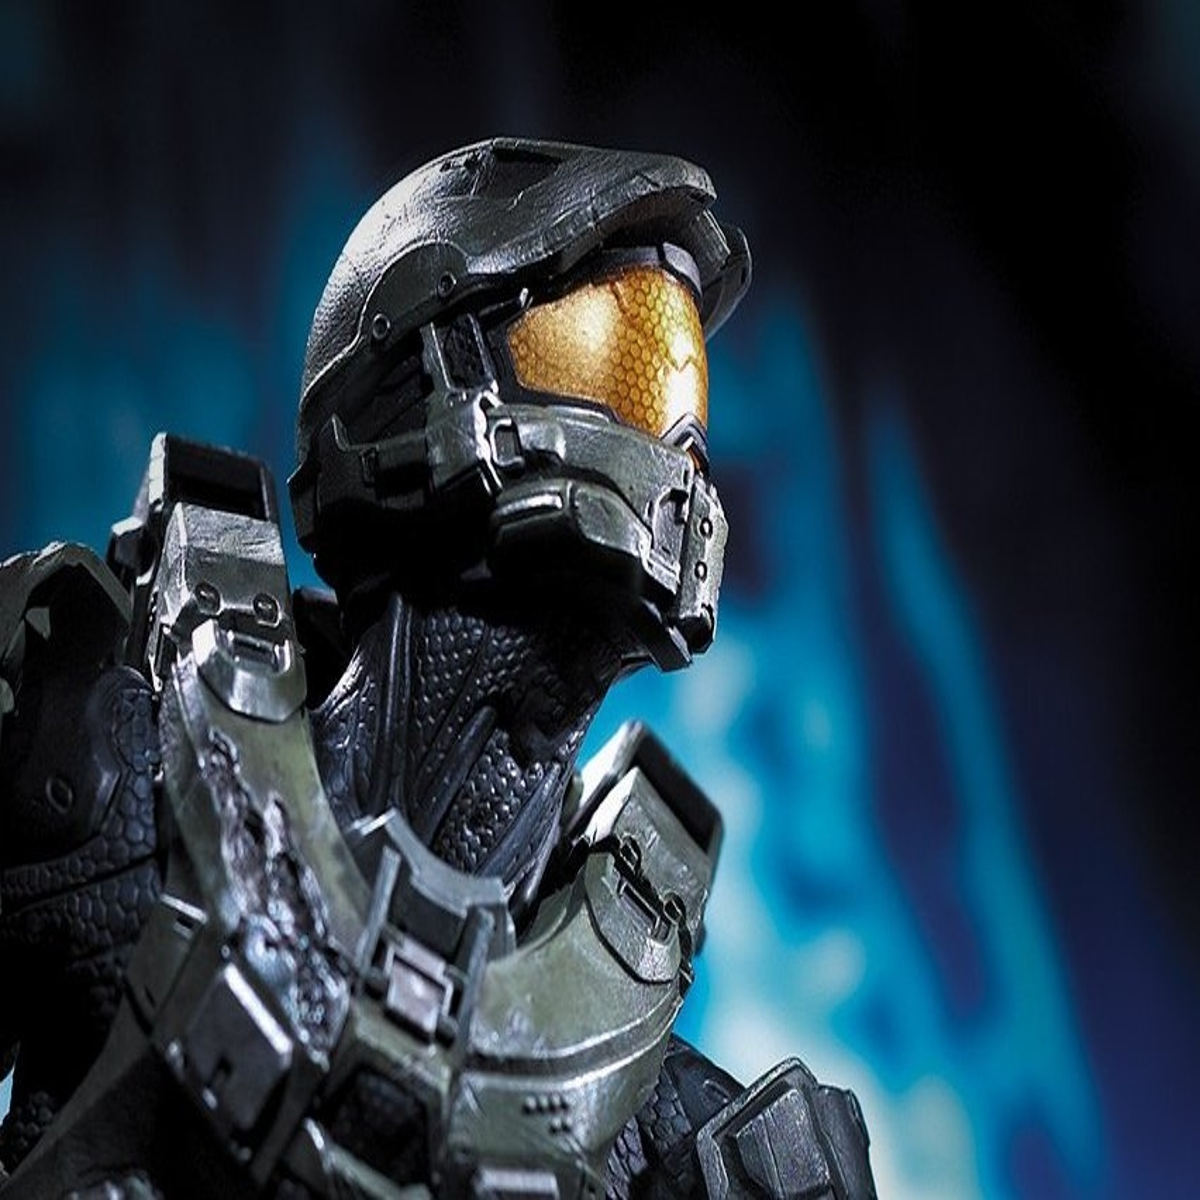 Halo: The Master Chief Collection is a compilation of first-person